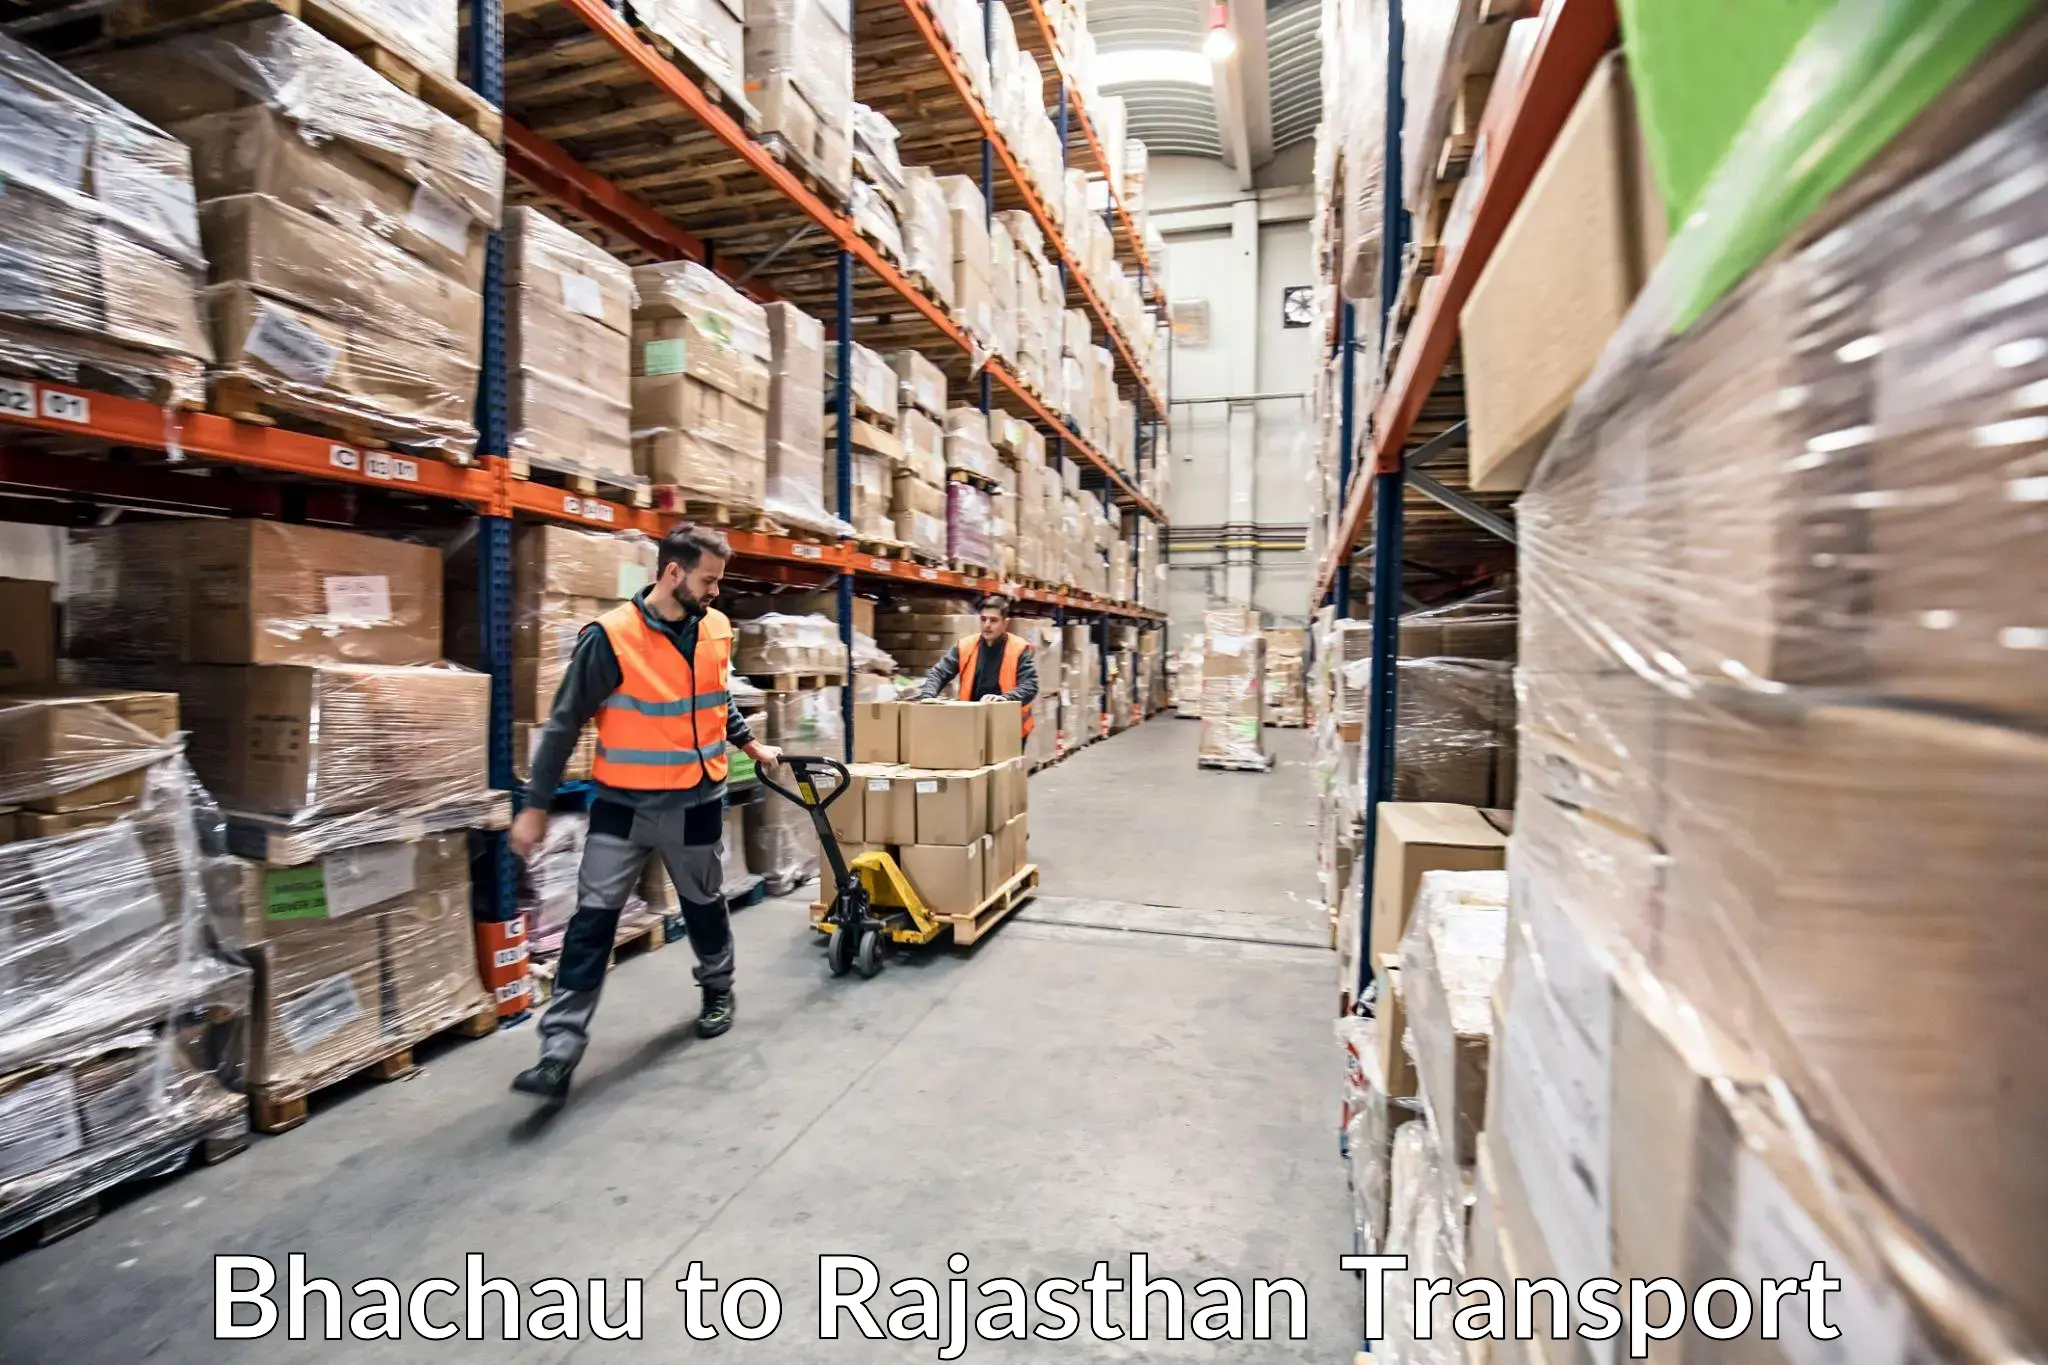 Truck transport companies in India Bhachau to Chaumahla